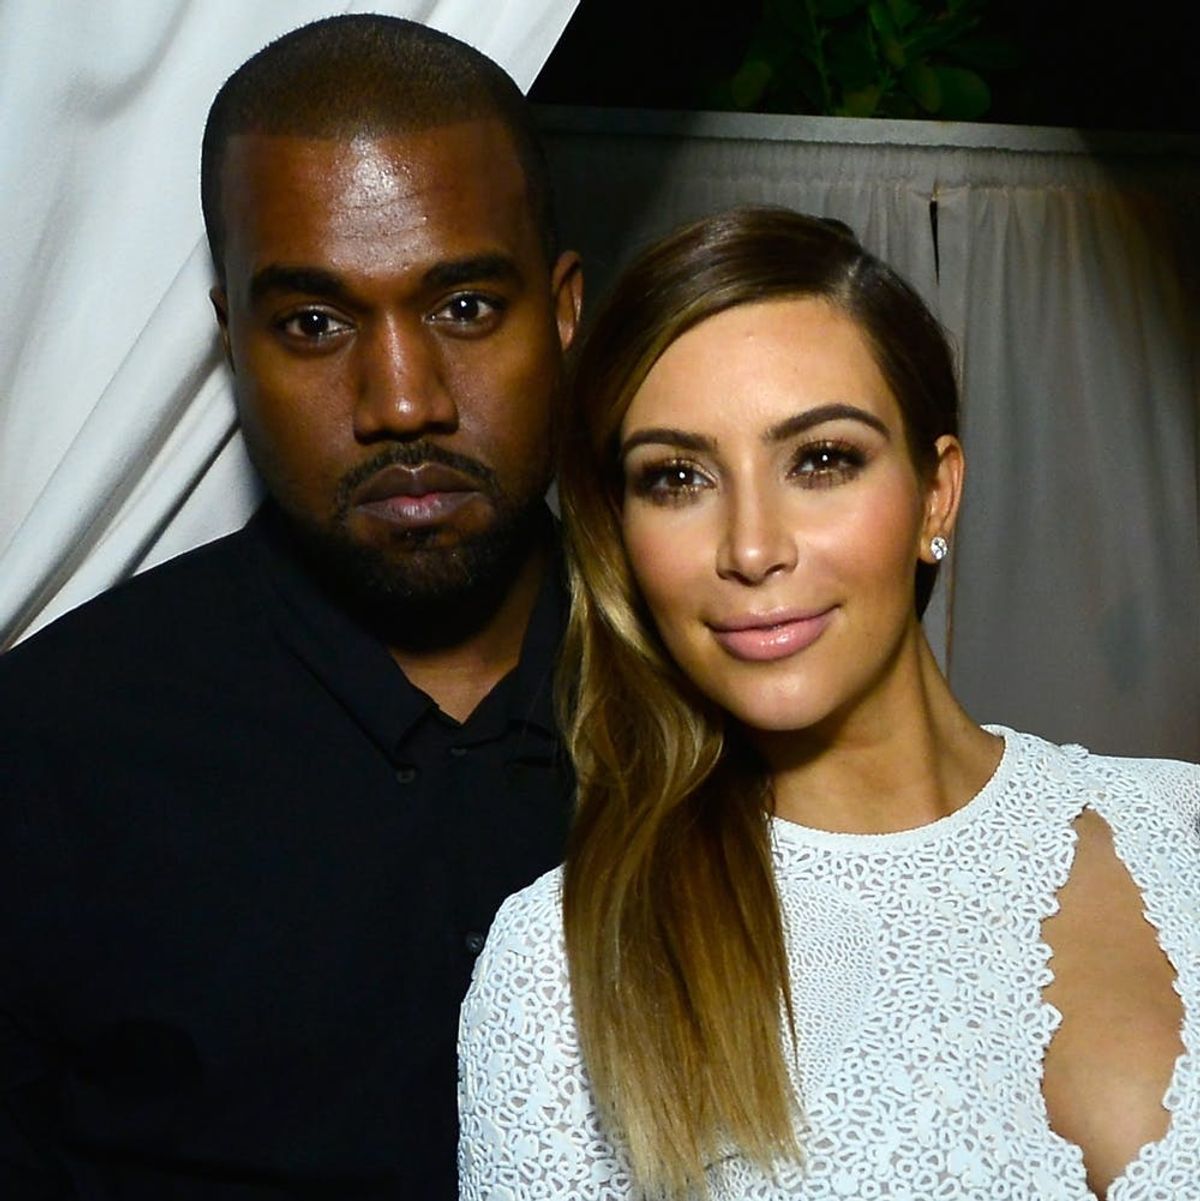 Kim and Kanye Just Made Their First Public Appearance Together Since October